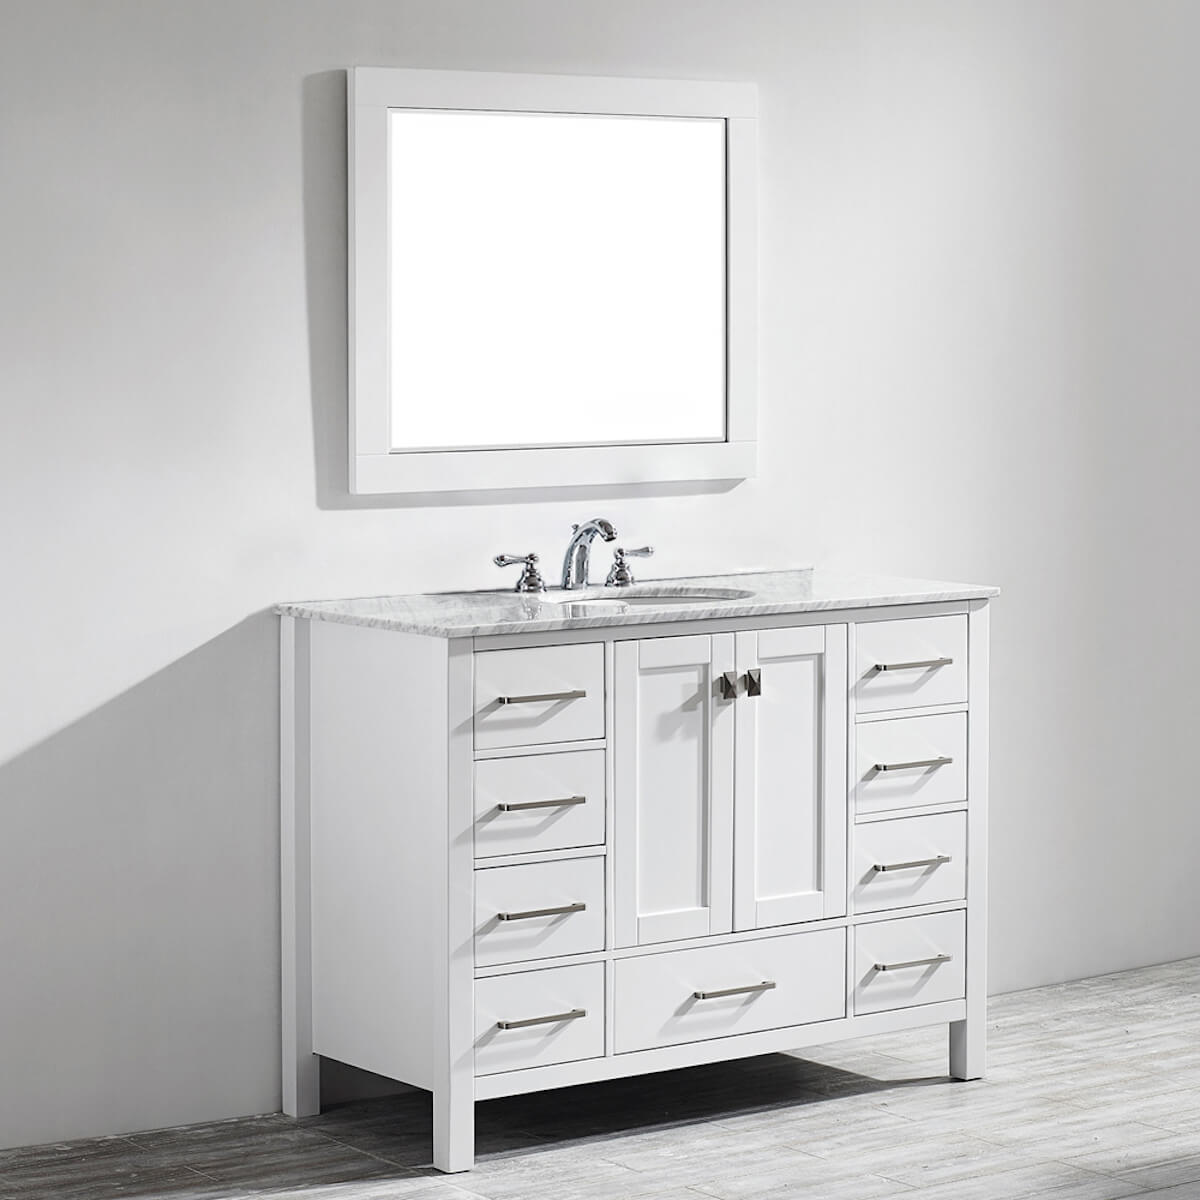 Vinnova Gela 48" White Freestanding Single Vanity with Carrara White Marble Countertop With Mirror Side 723048-WH-CA-NM